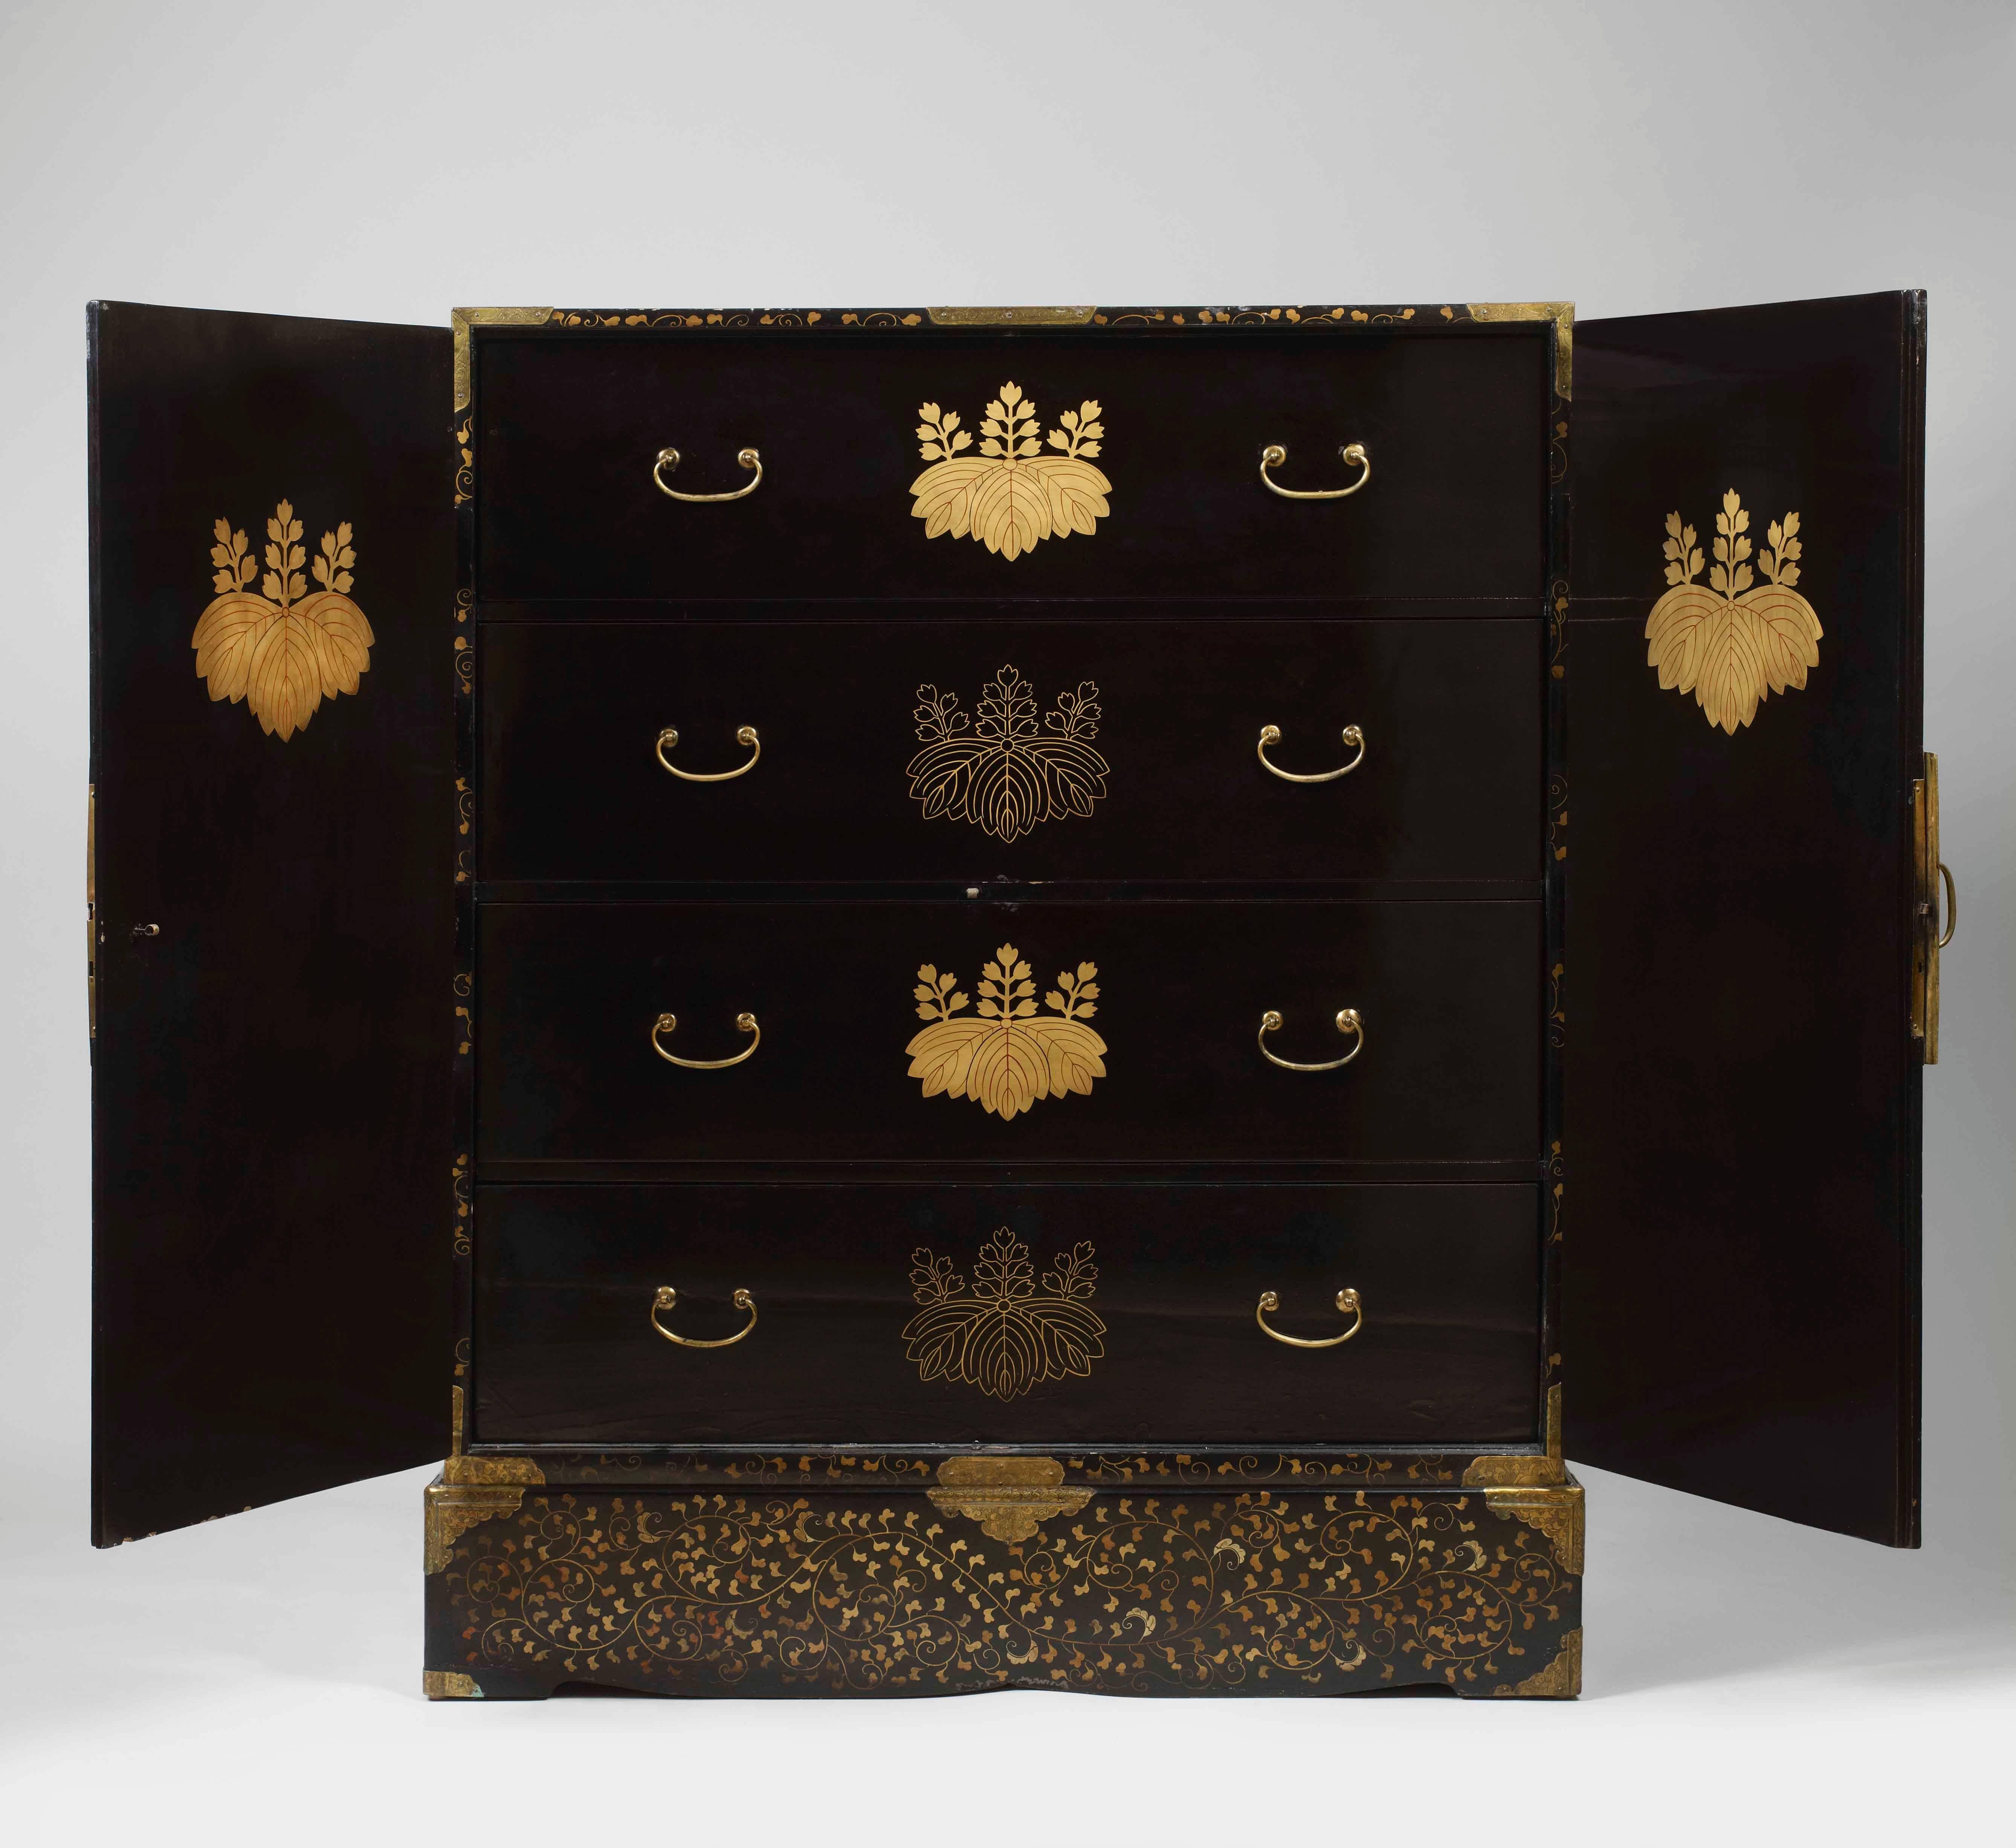 A Chinese export parcel-gilt black lacquer cabinet on stand lacquered to imitate Japanese lacquer, the pair of doors emblazoned with the crest of Mikado go-shichi no oni-kiri or Paulownia flower, the two doors centered by a brass lock plate opening